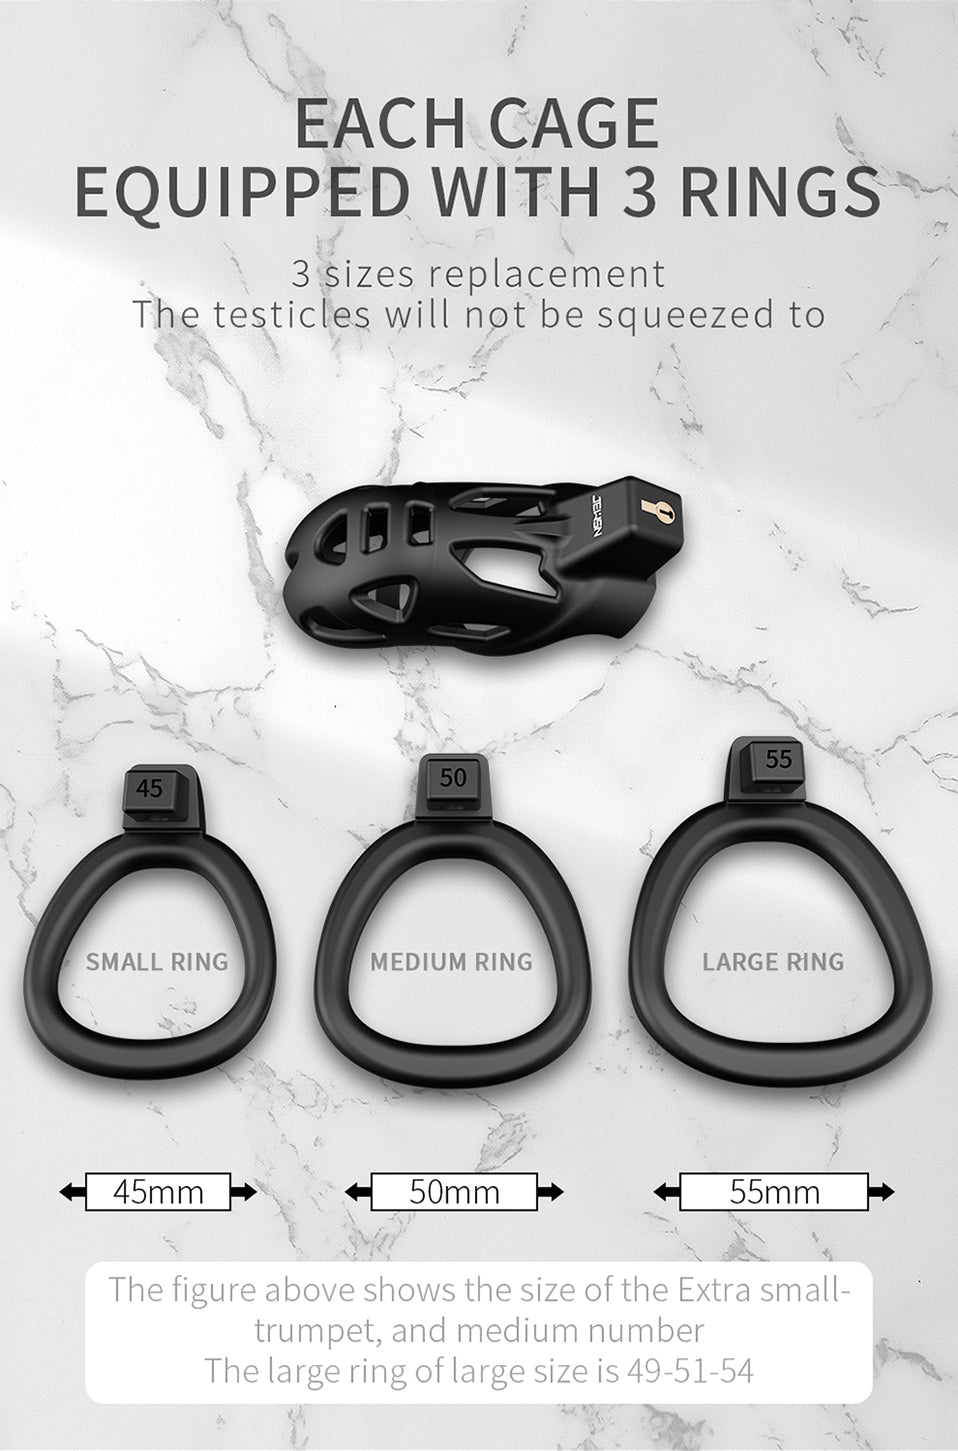 JEUSN CB PENIS LOCK male chastity cage adult penis Rings sex toy 24